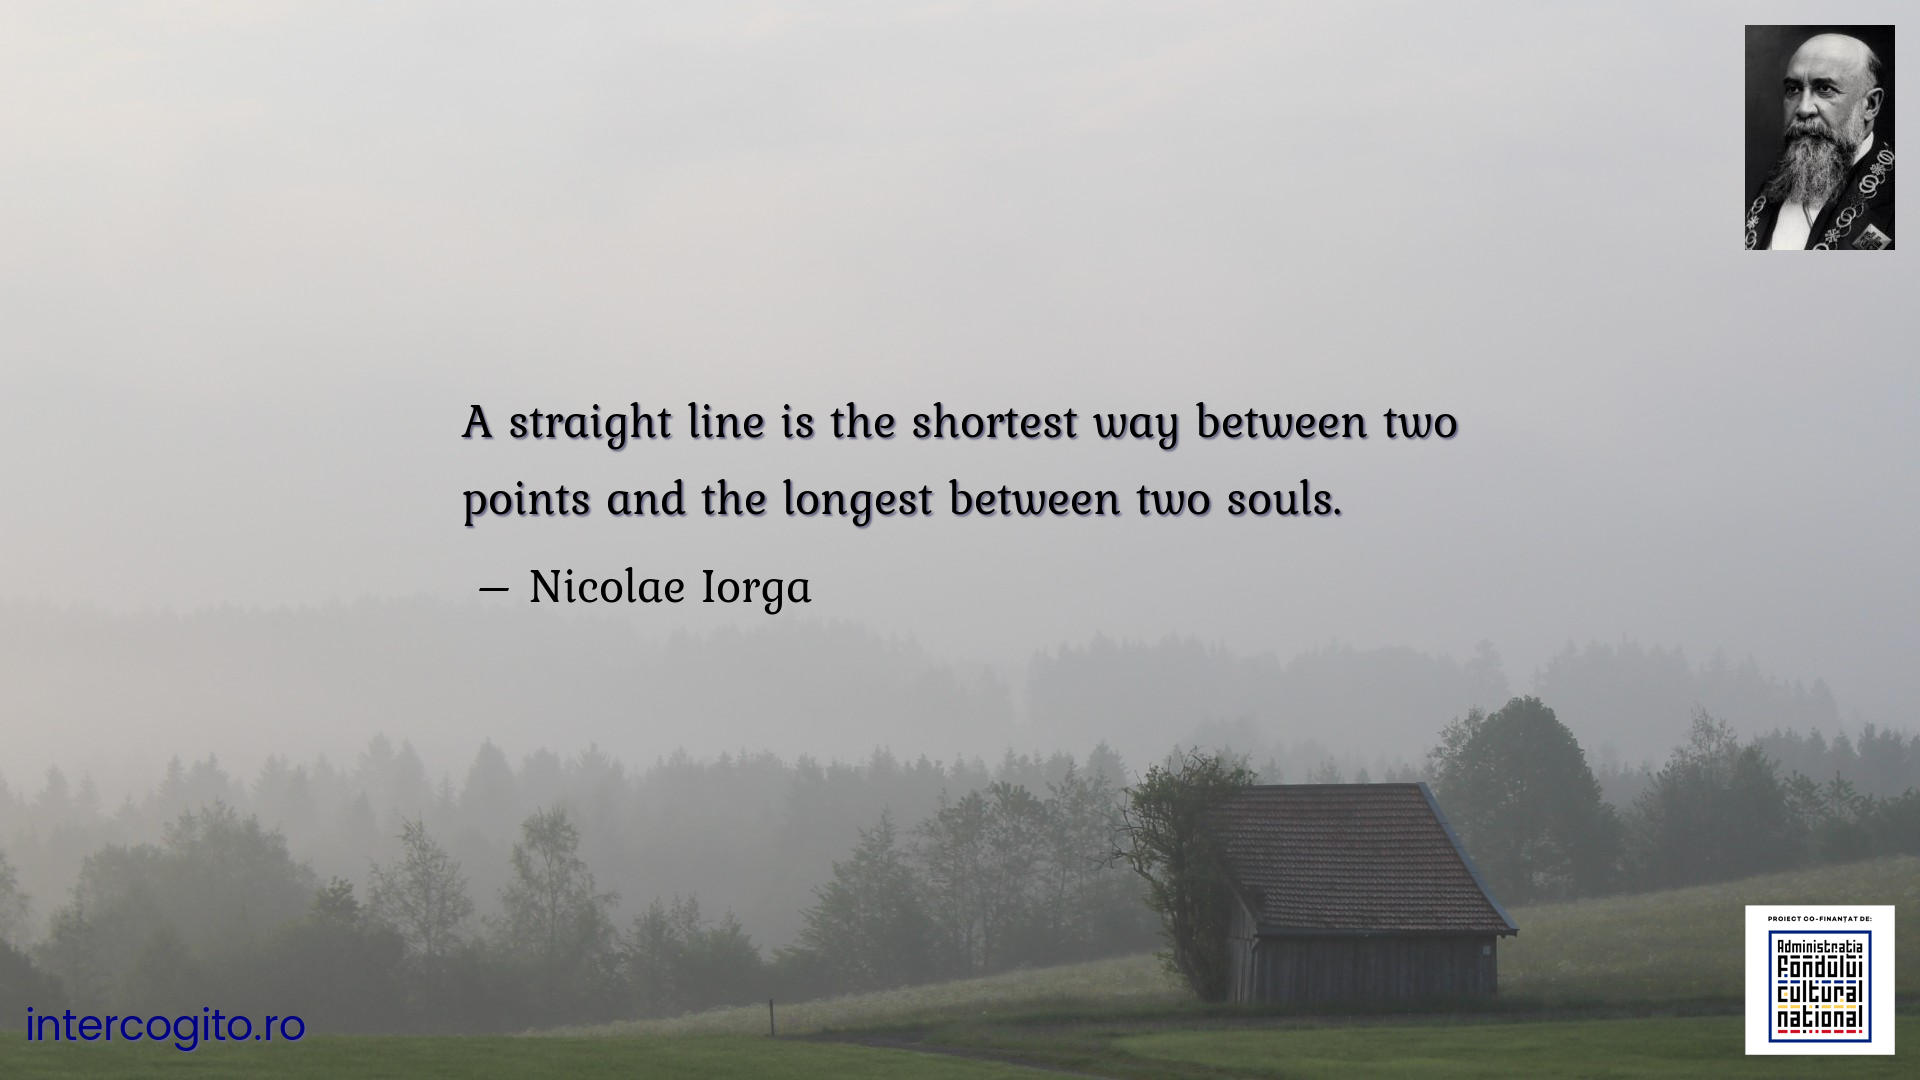 A straight line is the shortest way between two points and the longest between two souls.